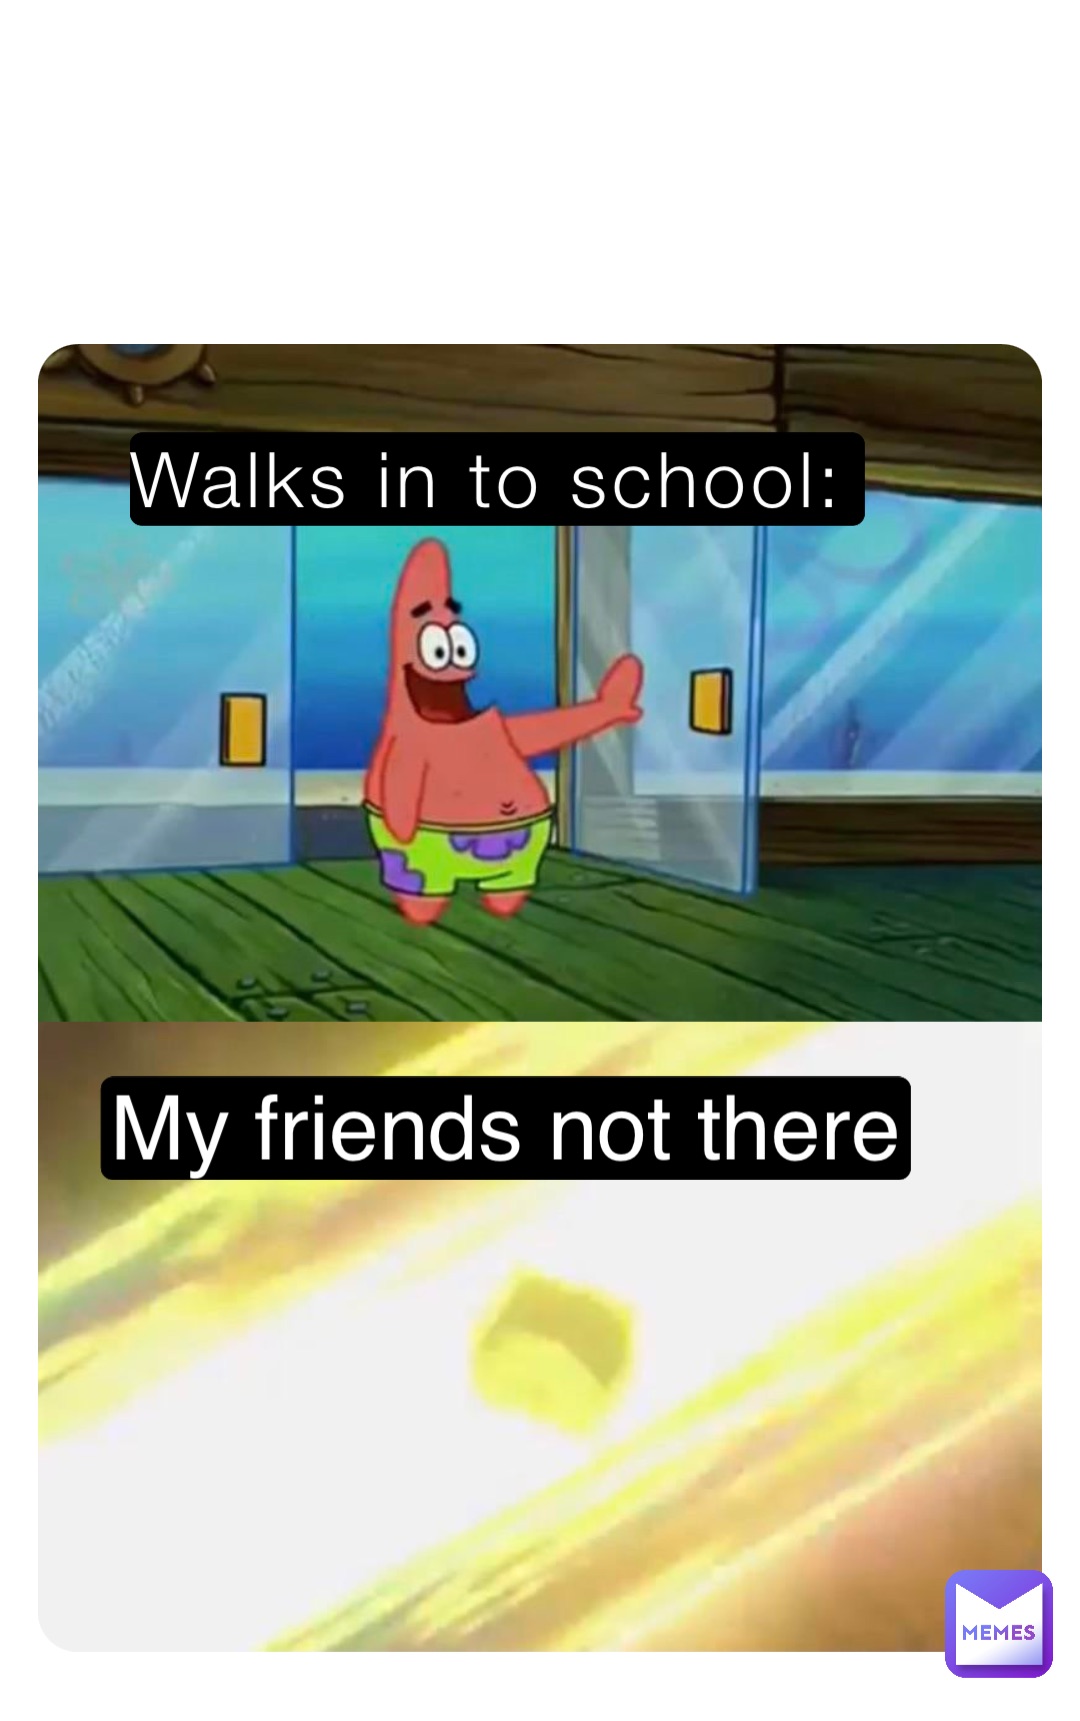 Walks in to school: My friends not there